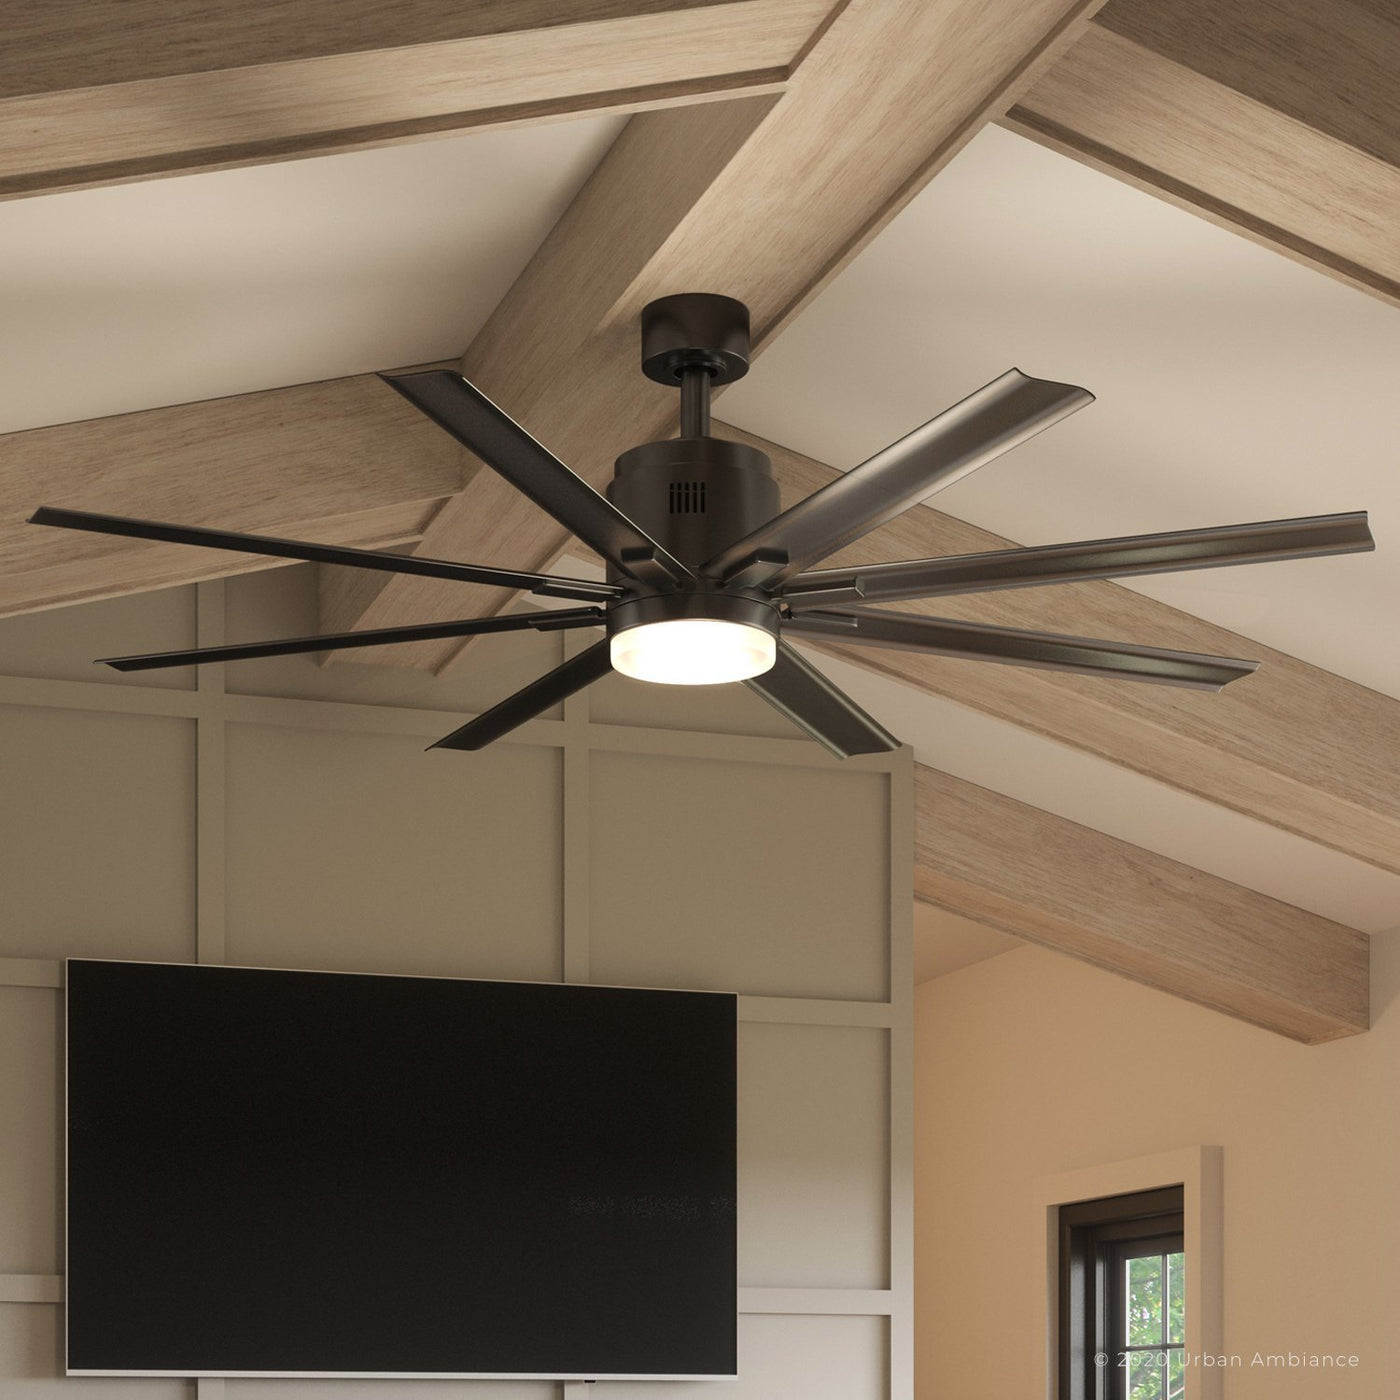 Uhp9053 Urban Loft Indoor Outdoor Ceiling Fan 16 8 H X 72 W Olde B Ambiance